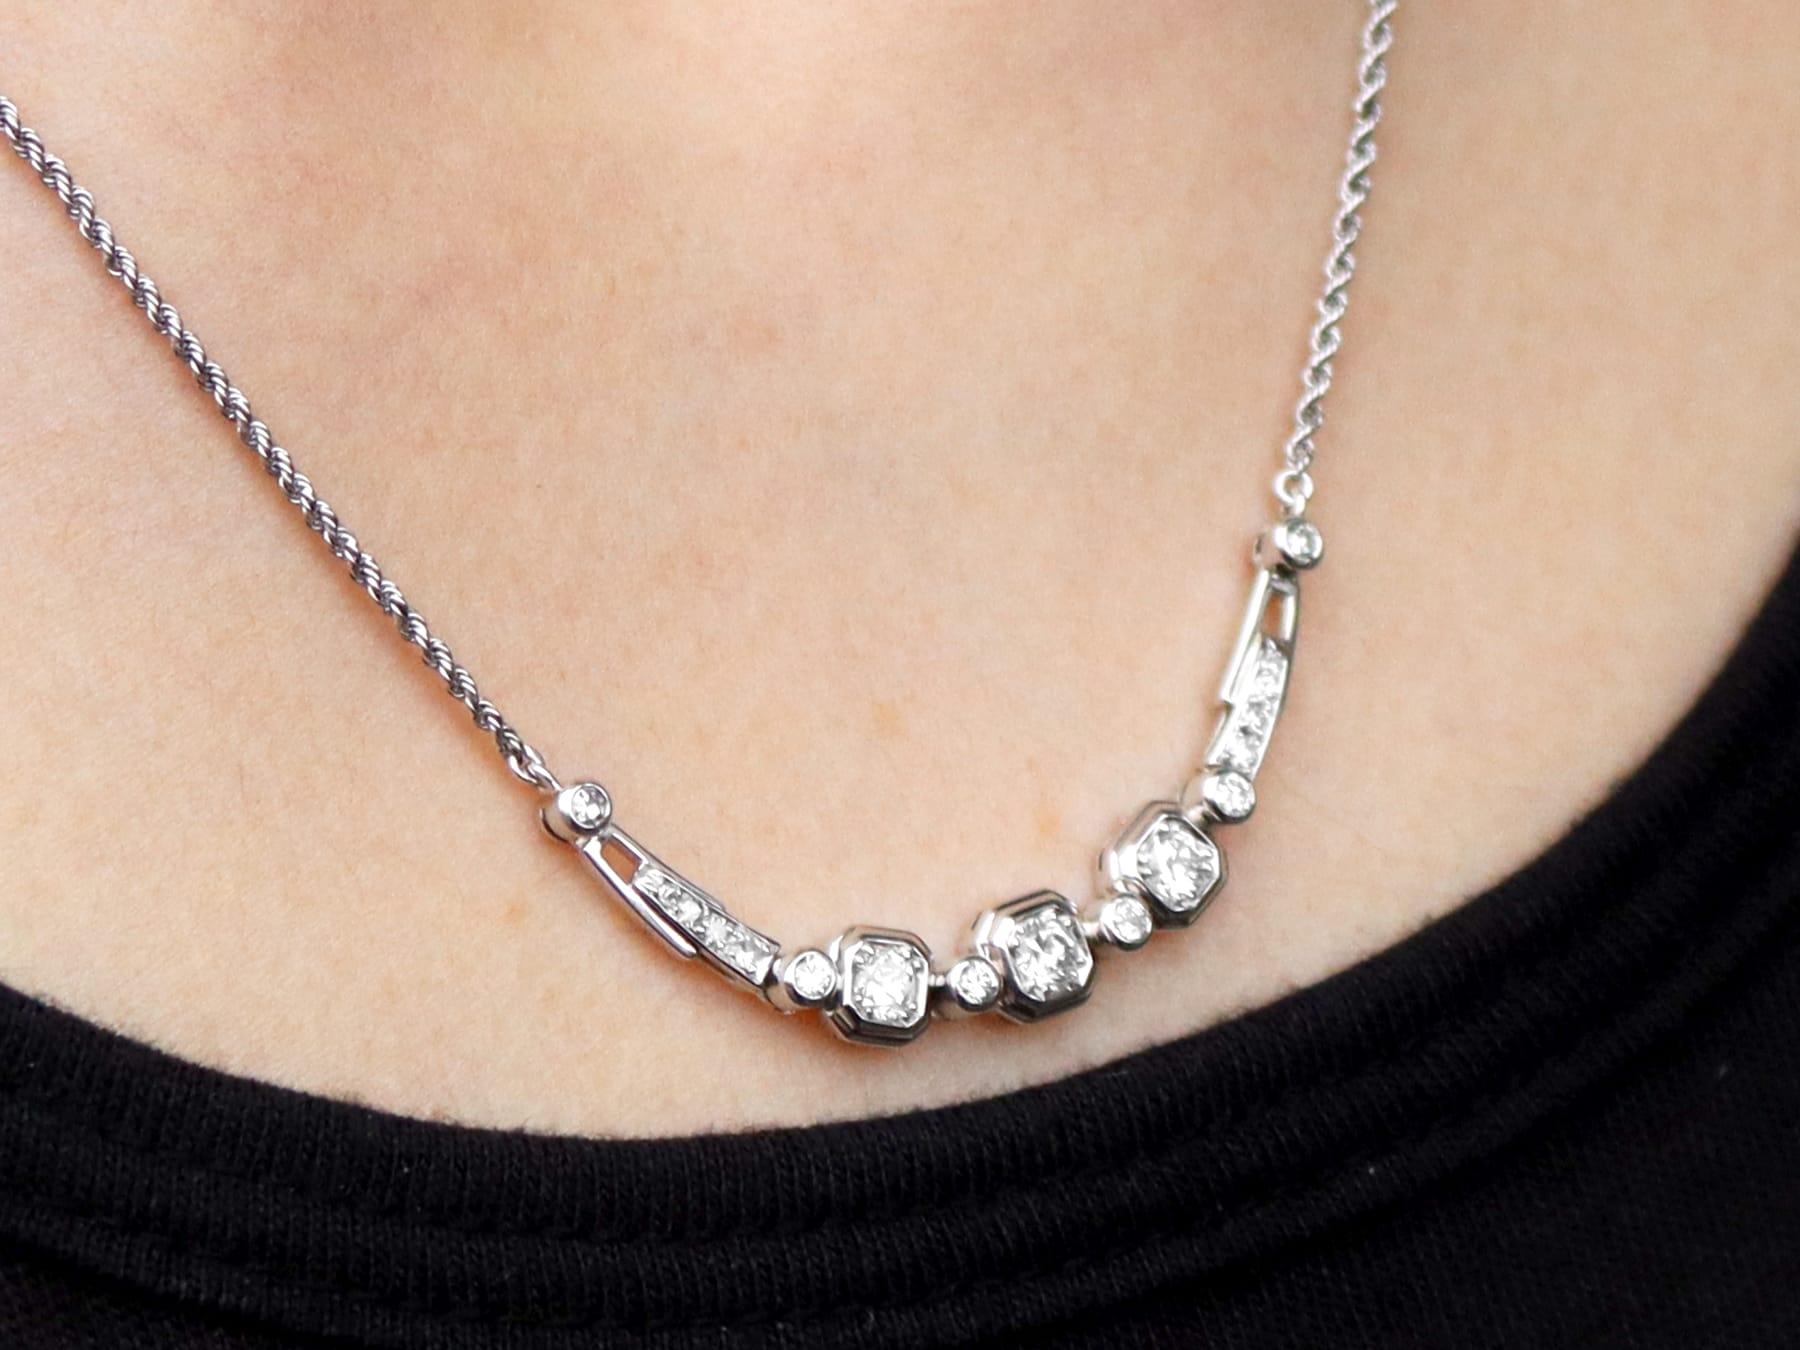 1920s 0.66 Carat Diamond and 18k White Gold Necklace For Sale 5